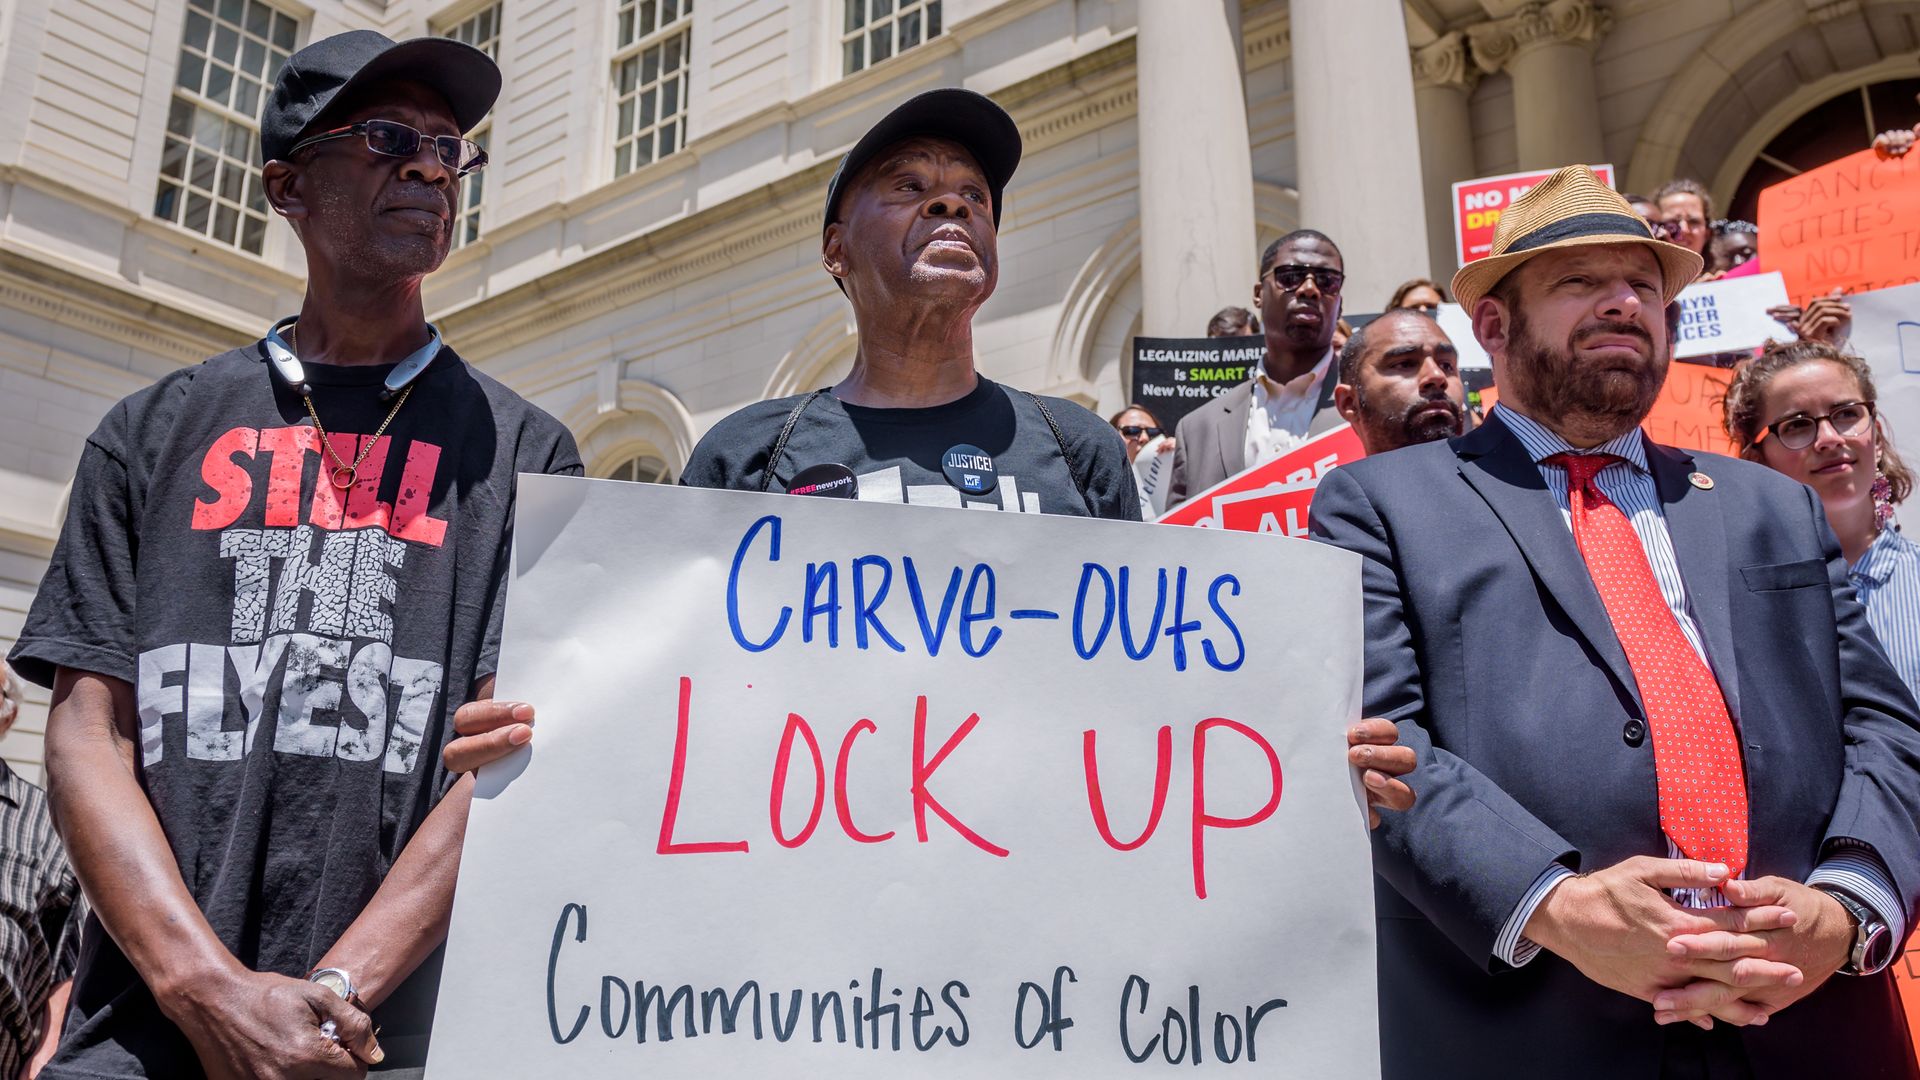 Advocates hold up a sign that says "Carve-outs lock up communities of color" to protest NYC marijuana policies